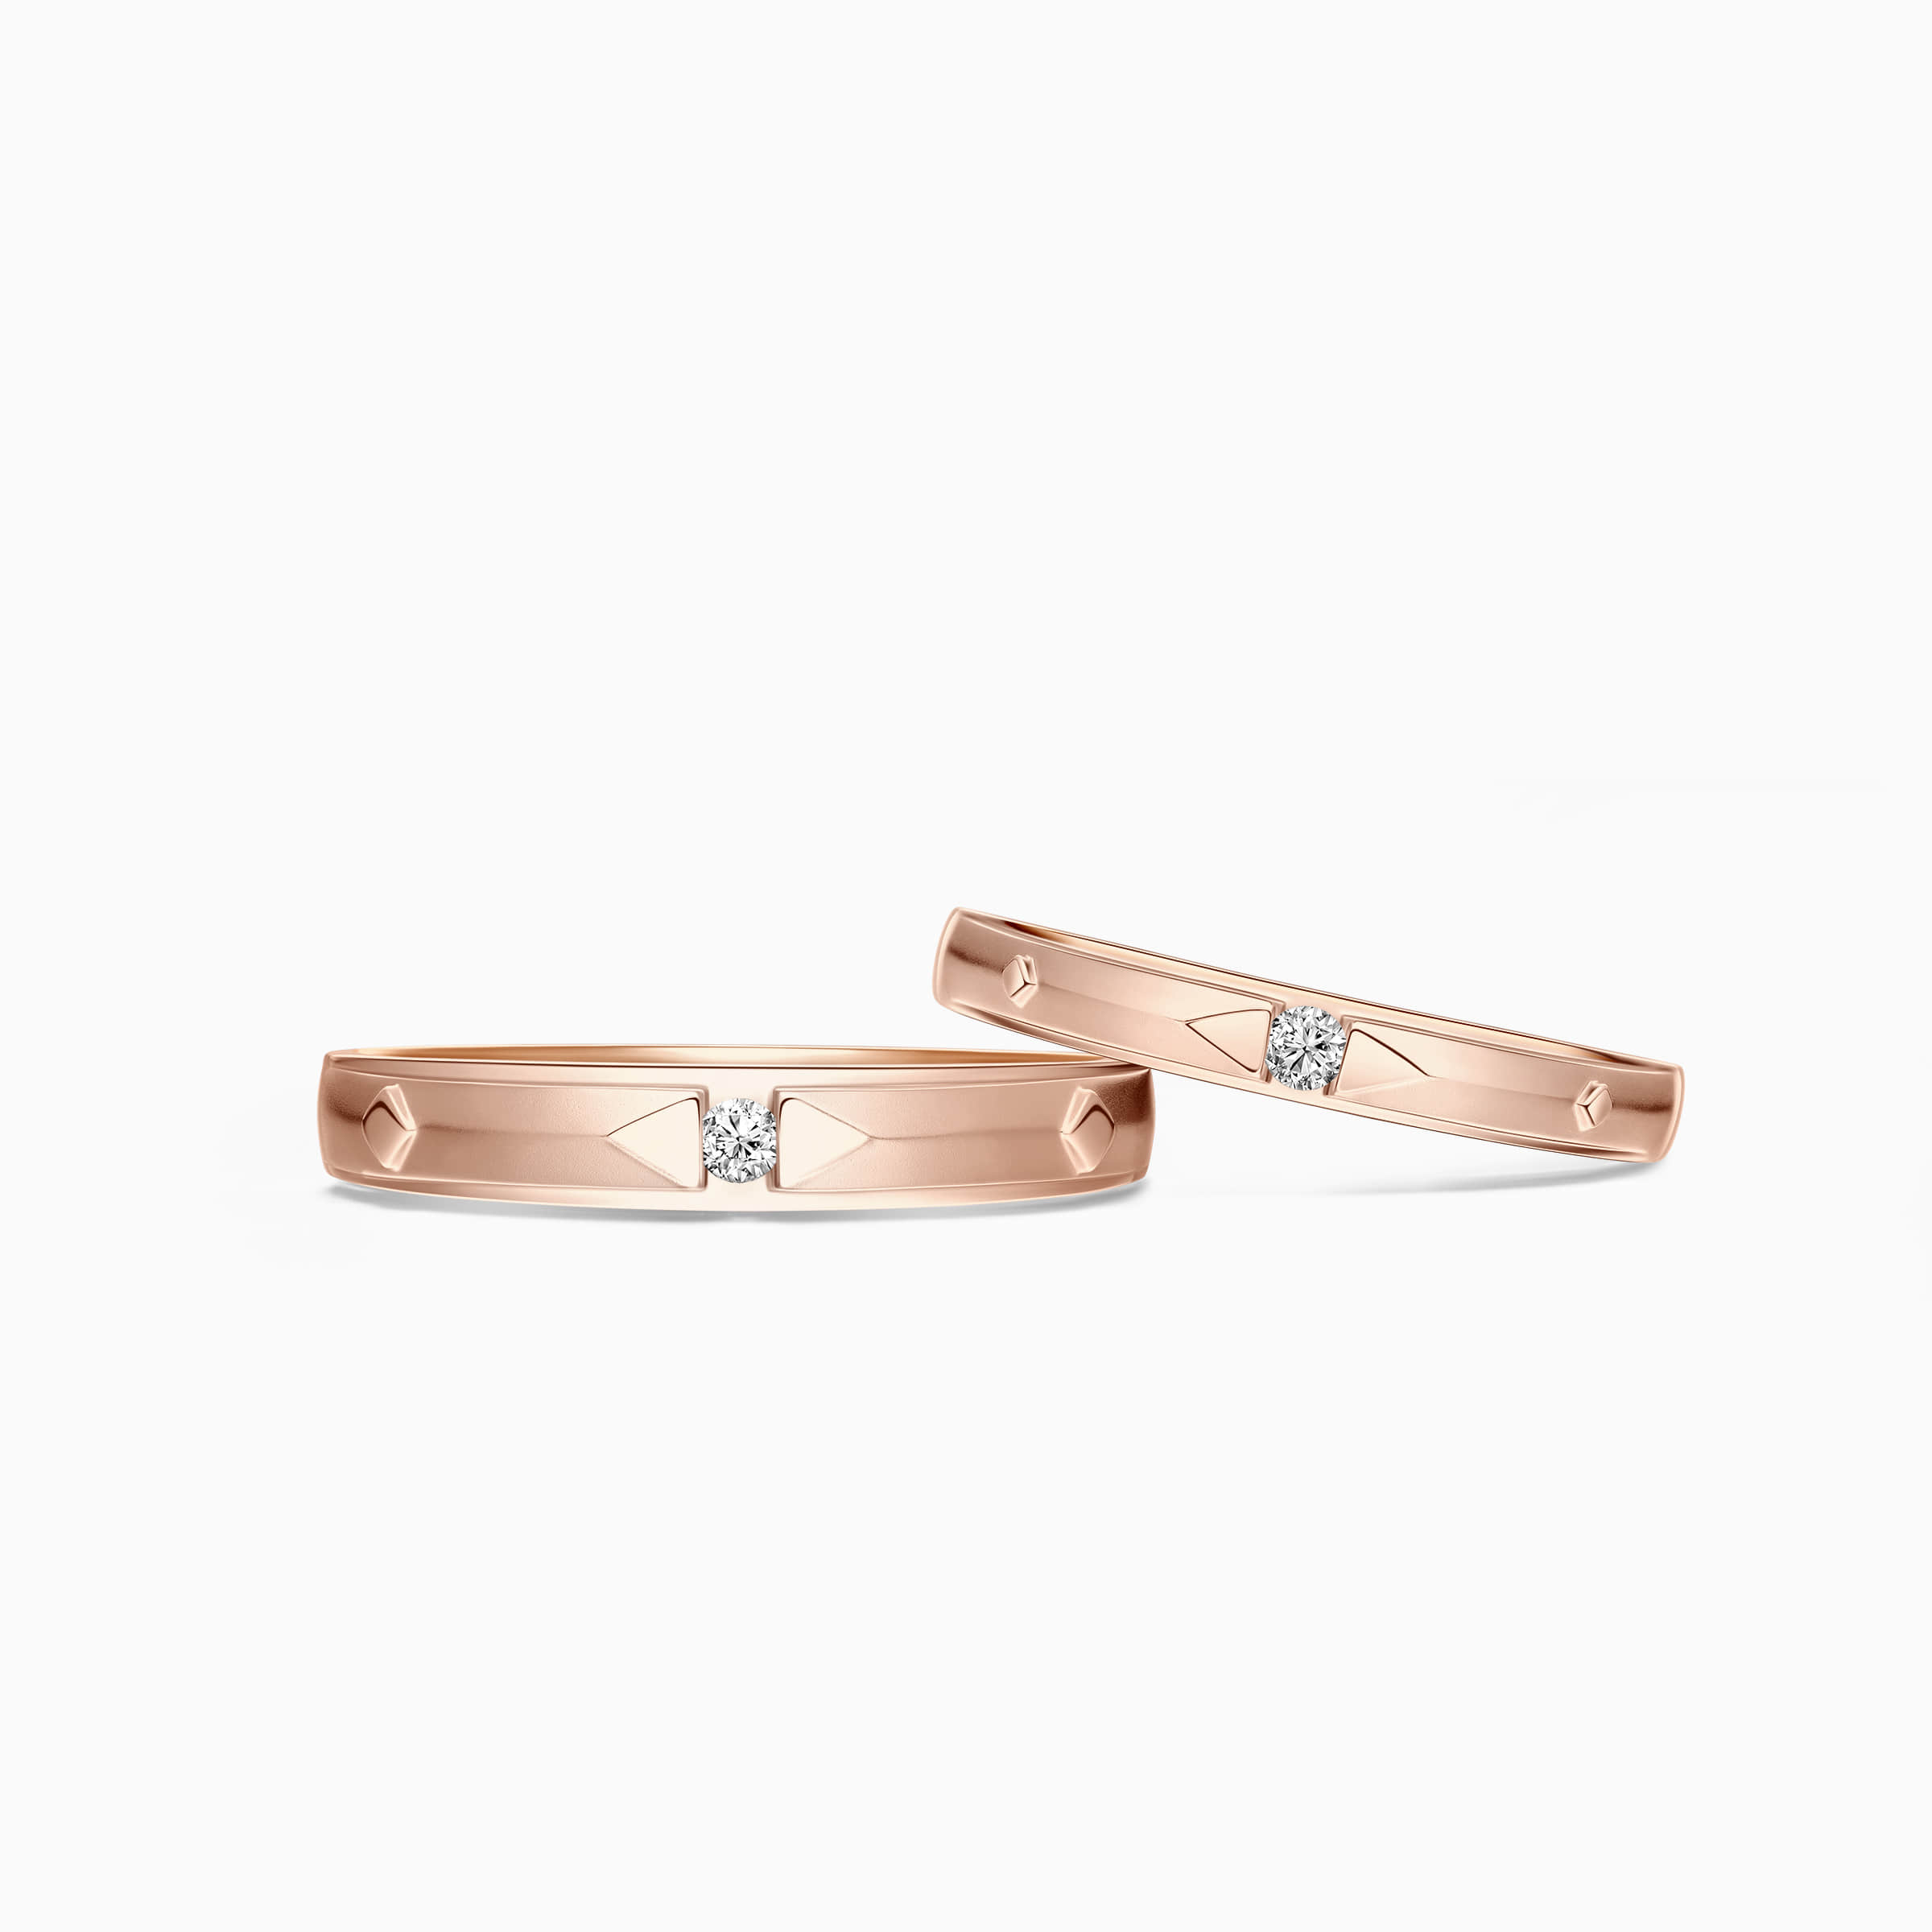 Darry Ring wedding sets his and hers in rose gold